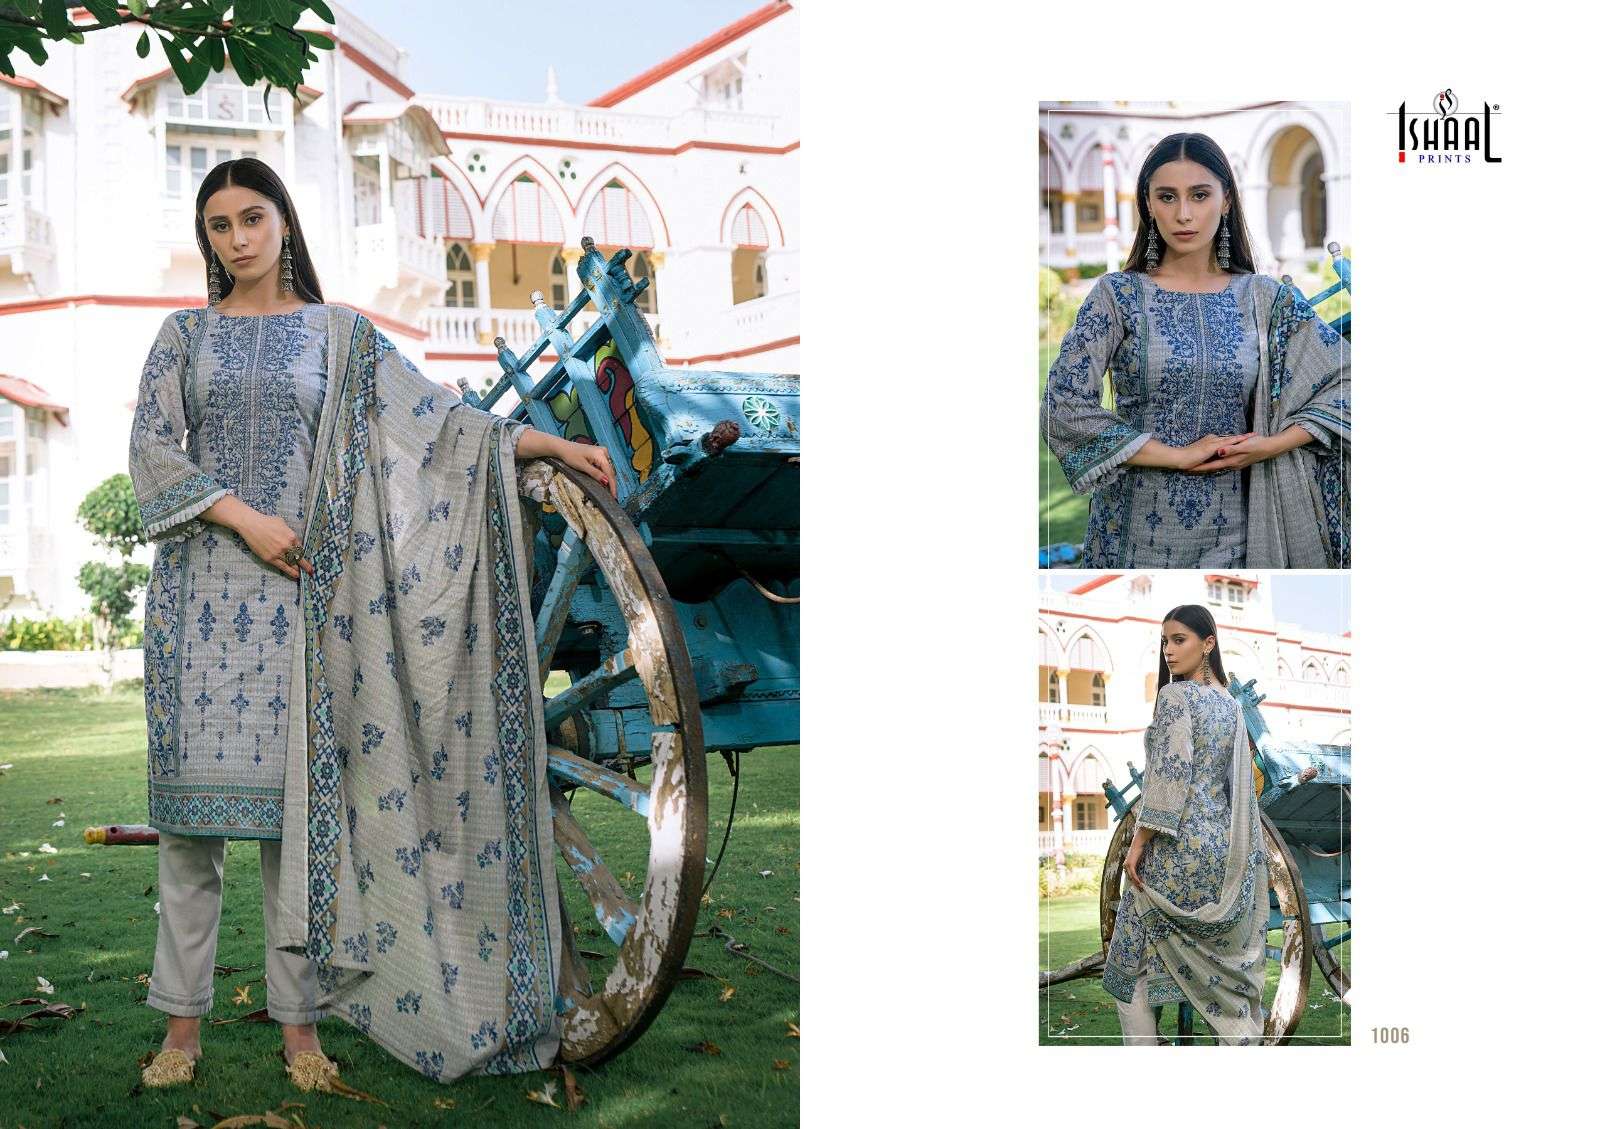 ISHAAL PRINTS EMBROIDERED LAWN COMBO